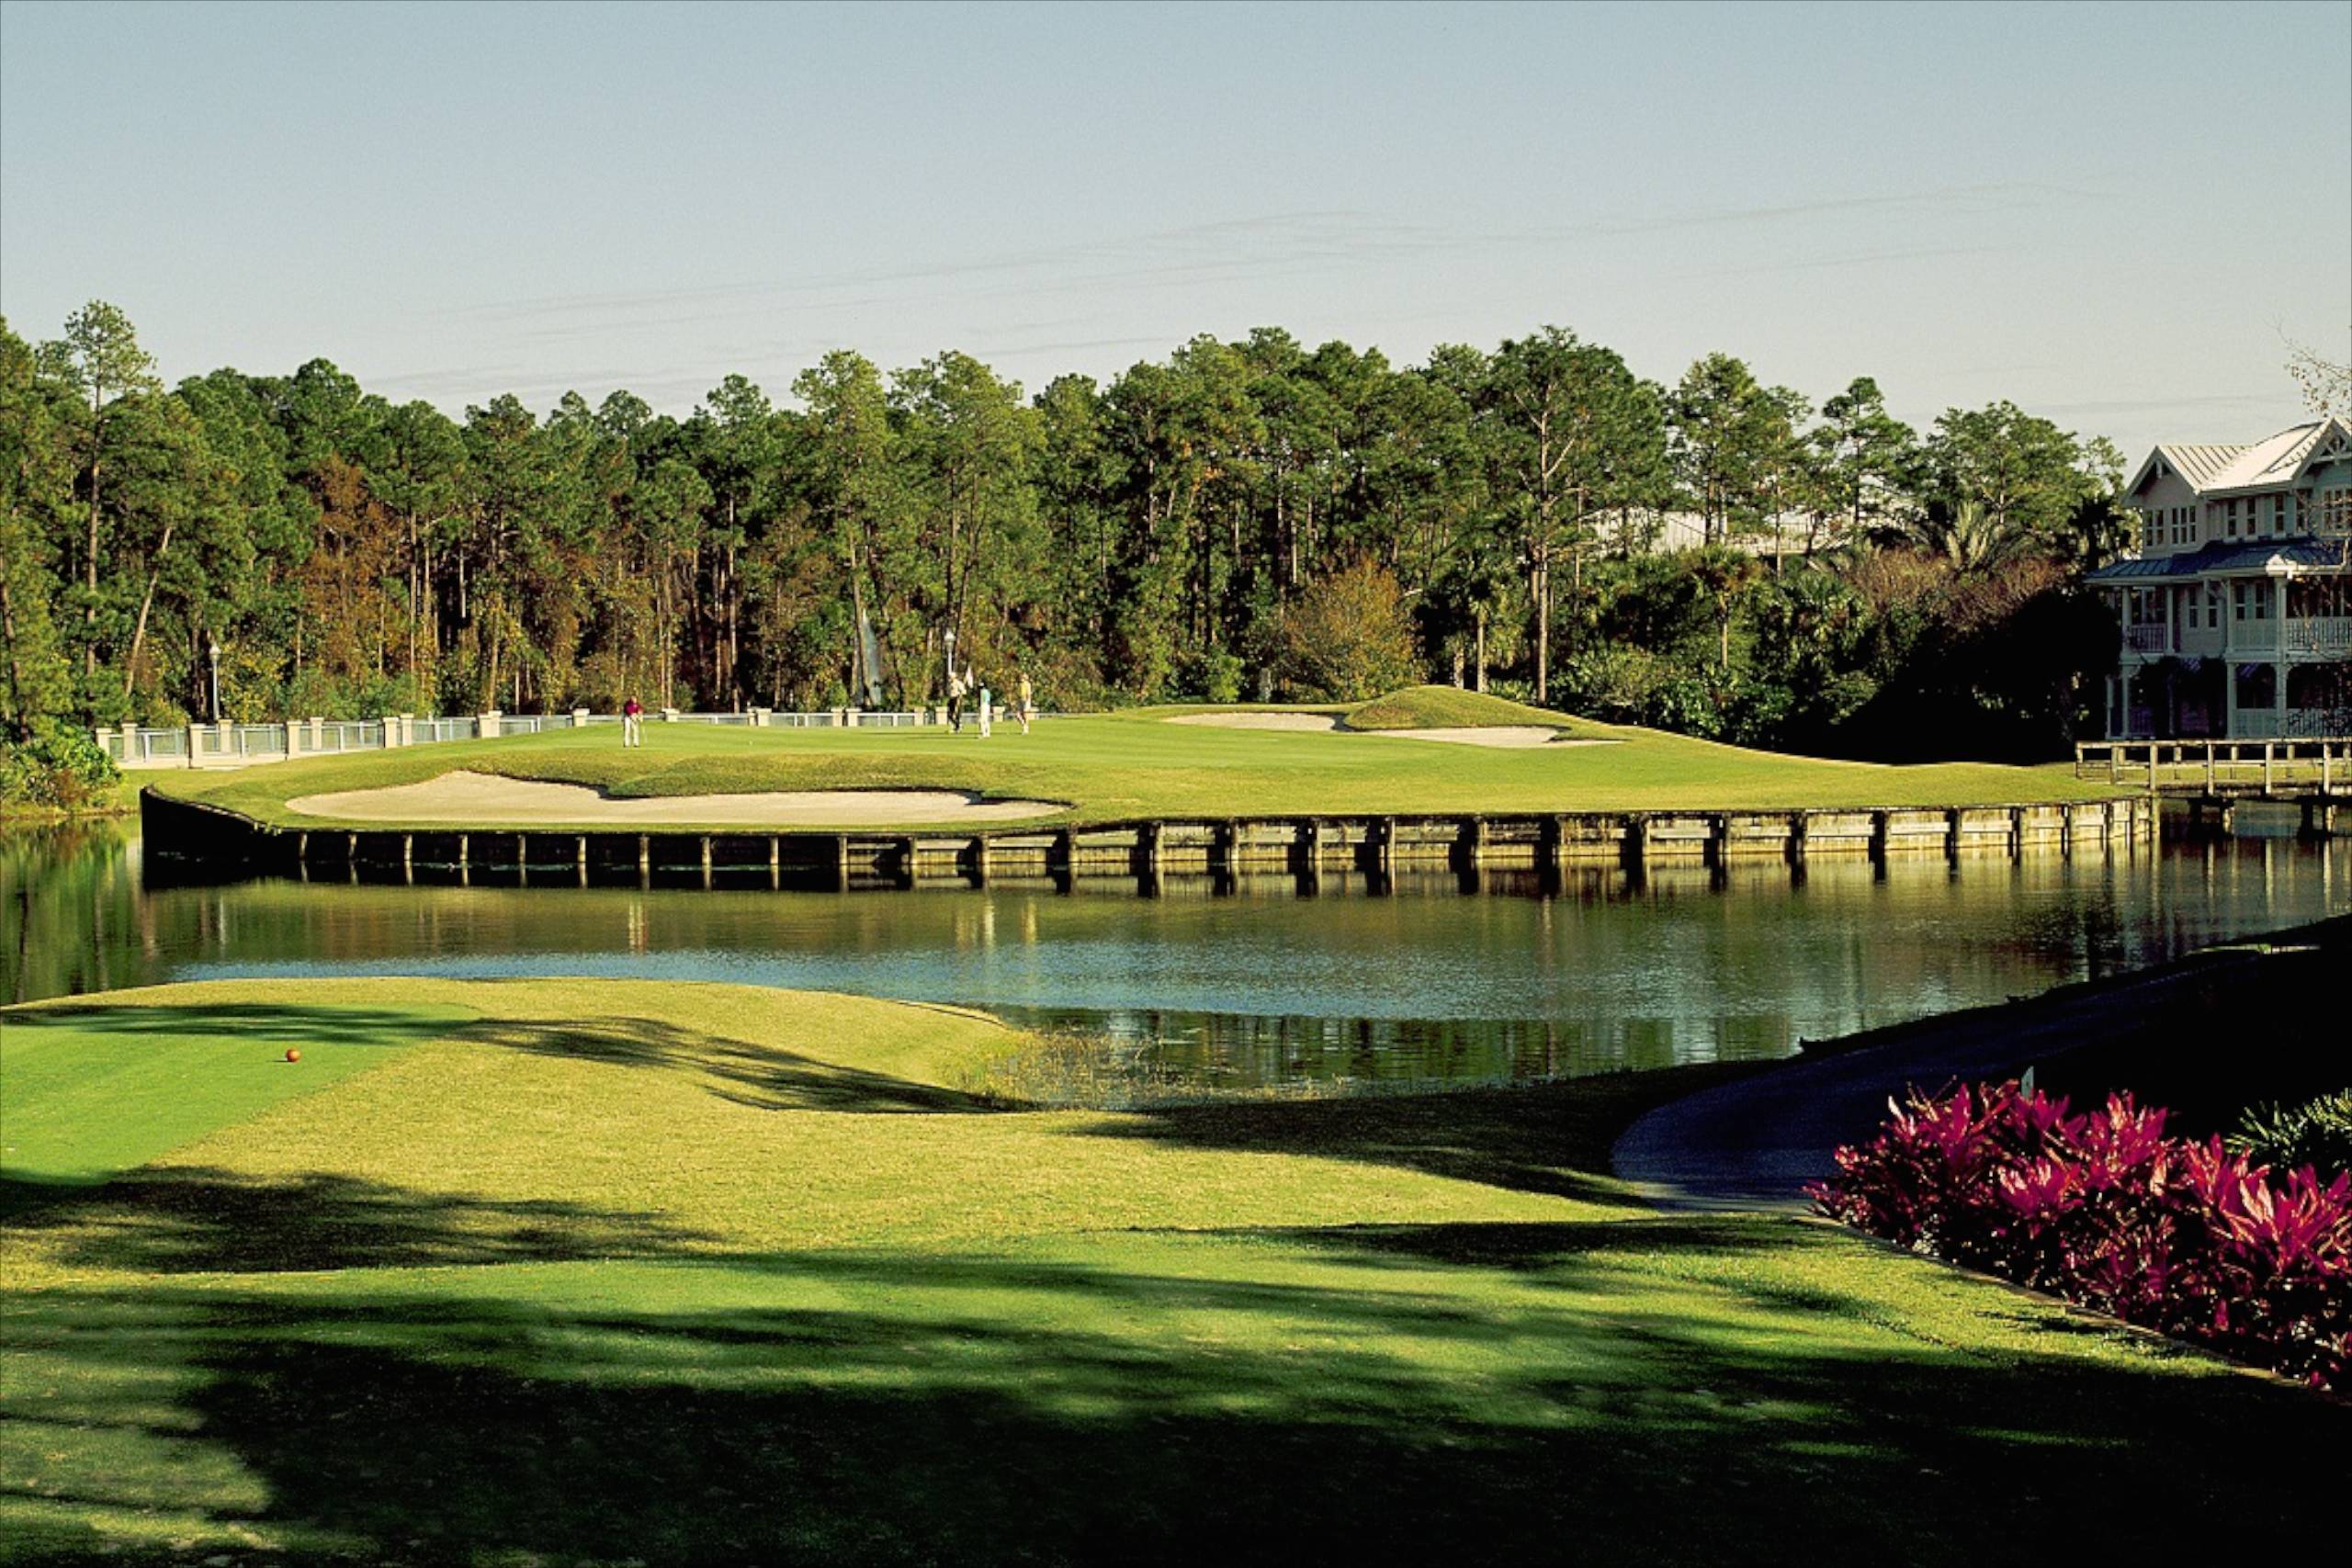 Complimentary golf club rental for guests staying at Walt Disney World Resort hotels